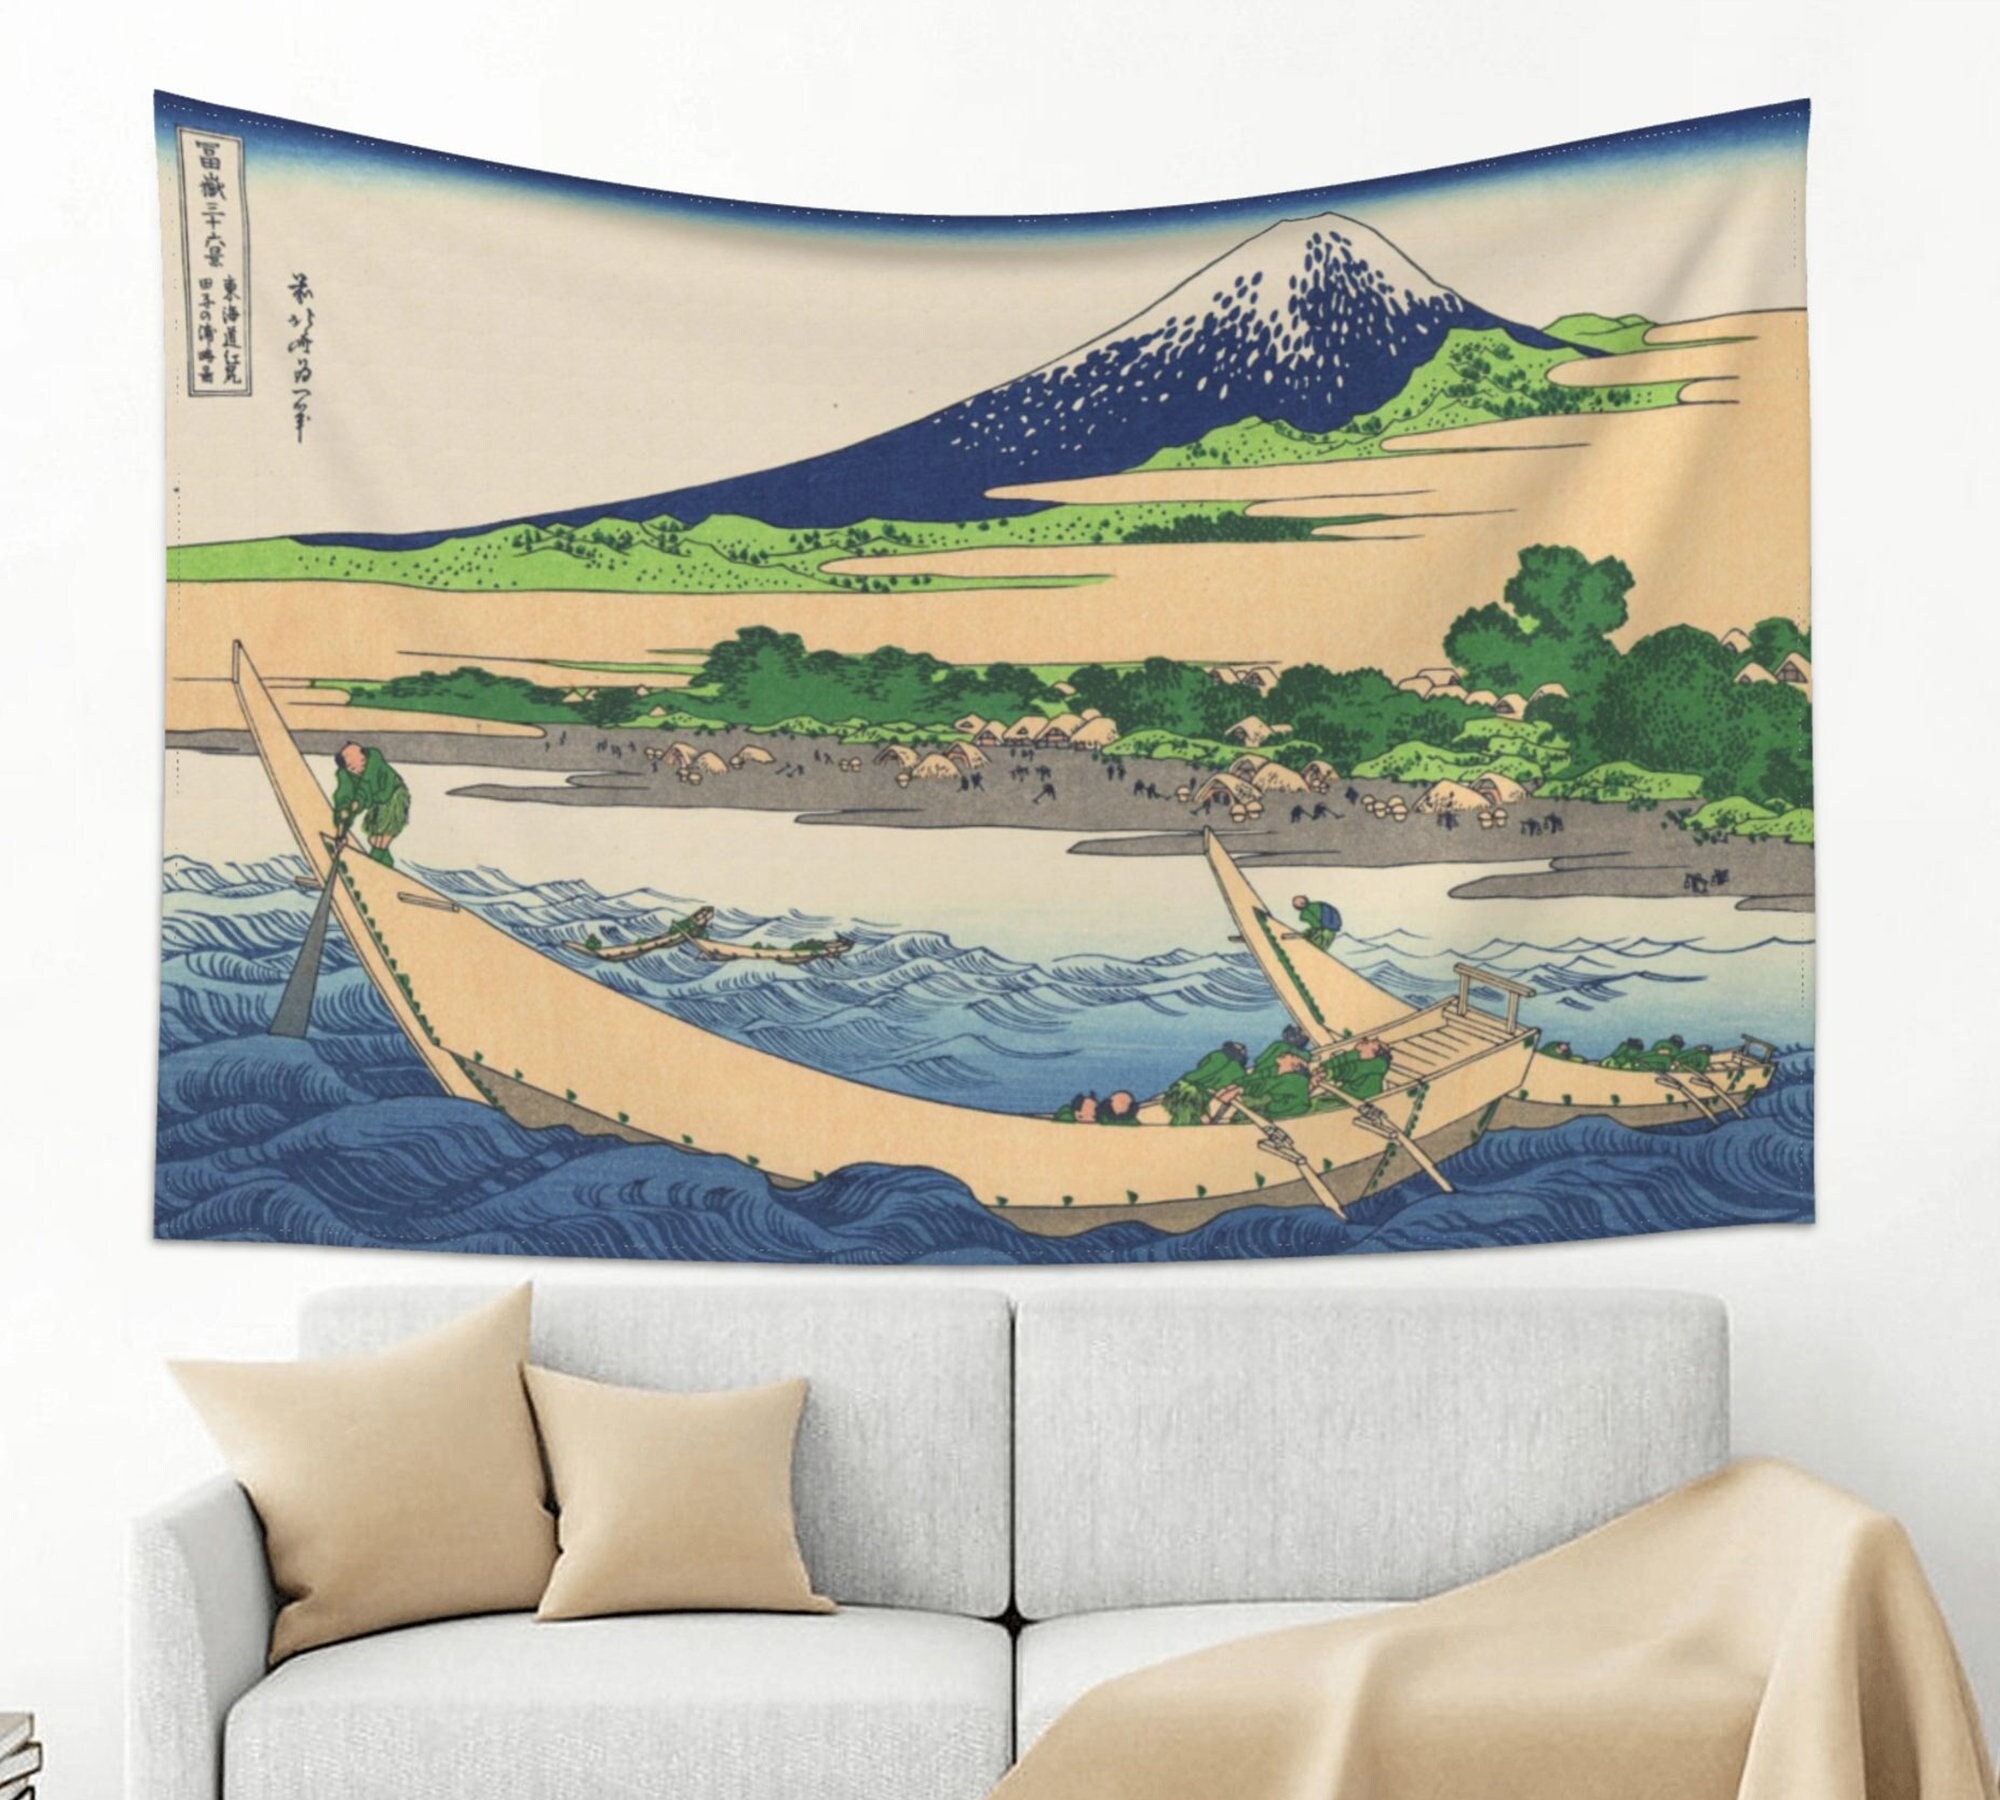 Feyigy Anime Tapestry - One Piece Tapestry-Going Merry Ship Room